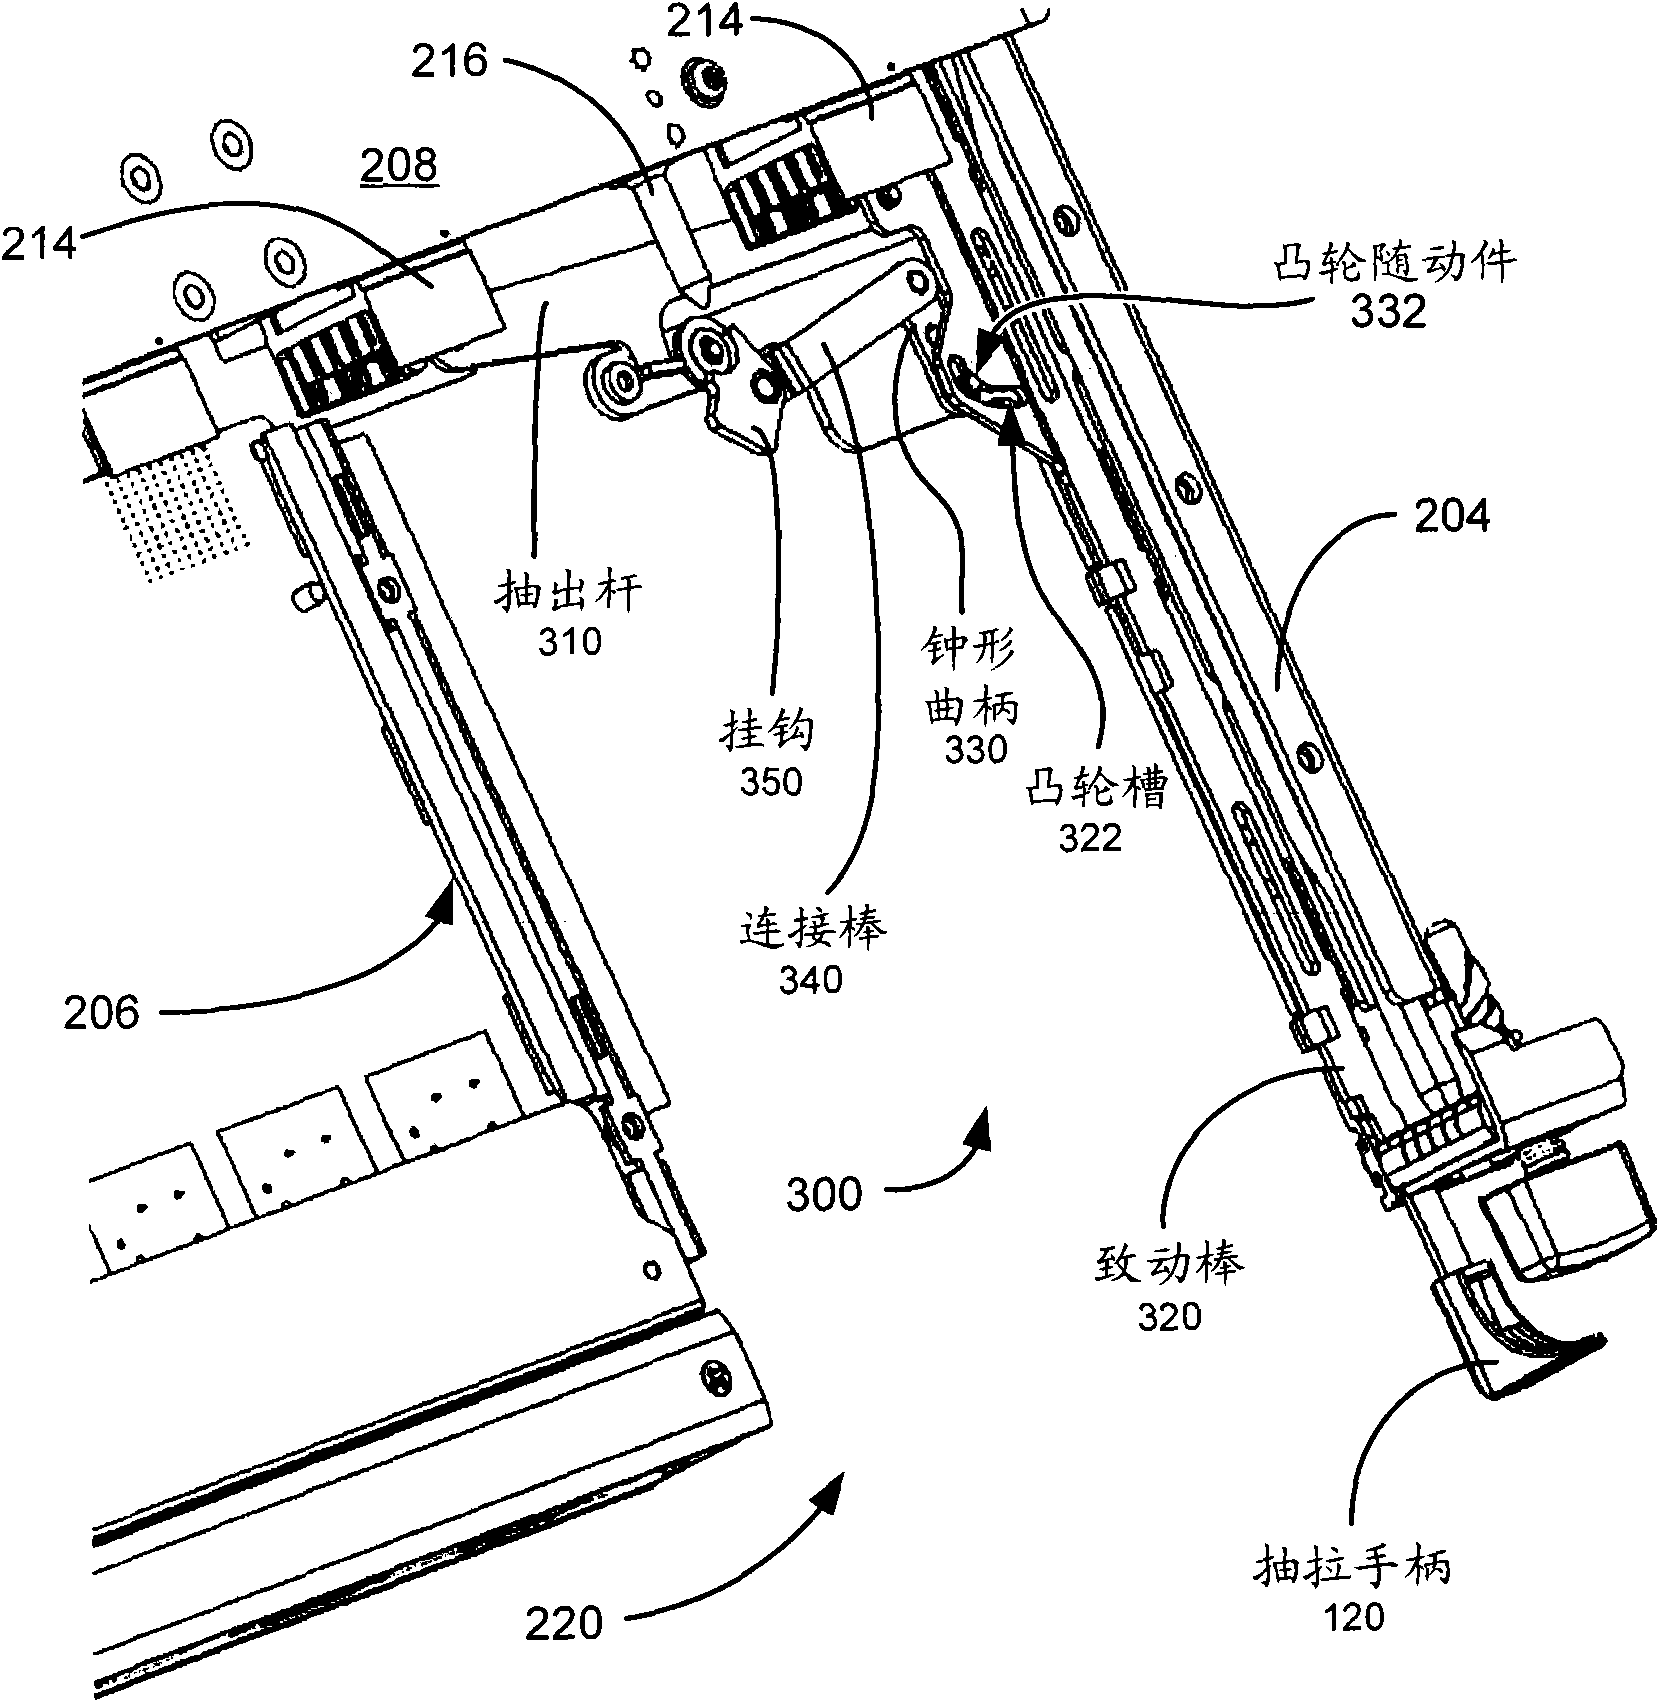 Retention-extraction device for removable cards in a chassis